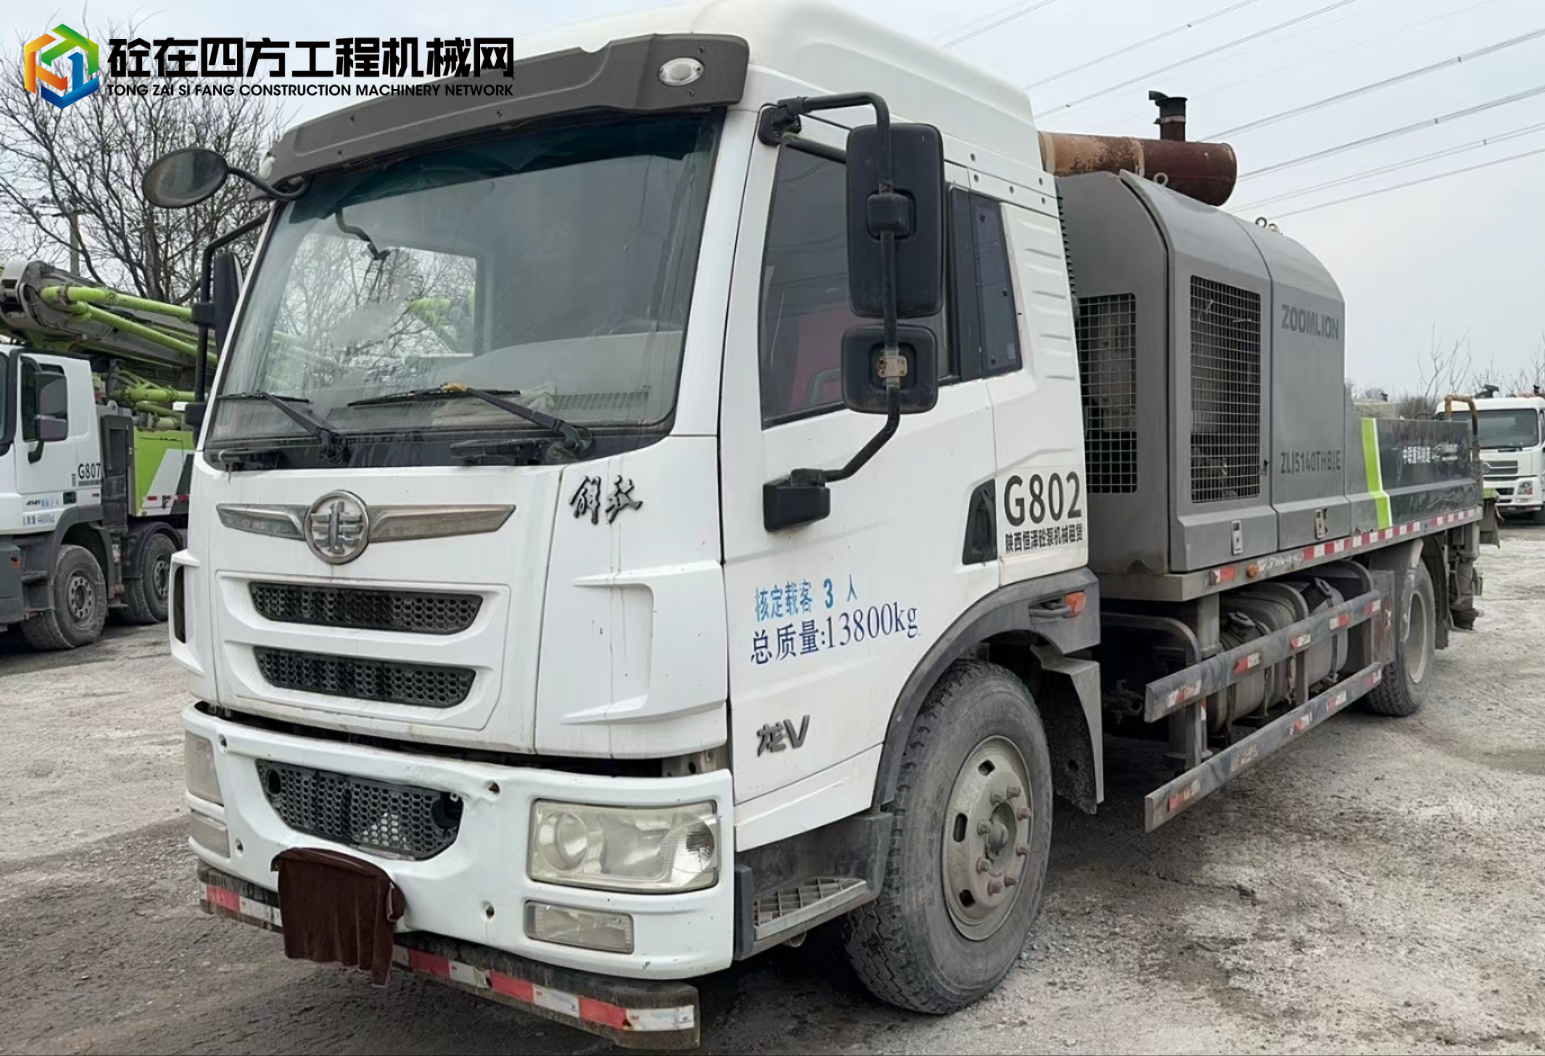 https://images.tongzsf.com/tong/truck_machine/20240401/1660a17af72614.jpg